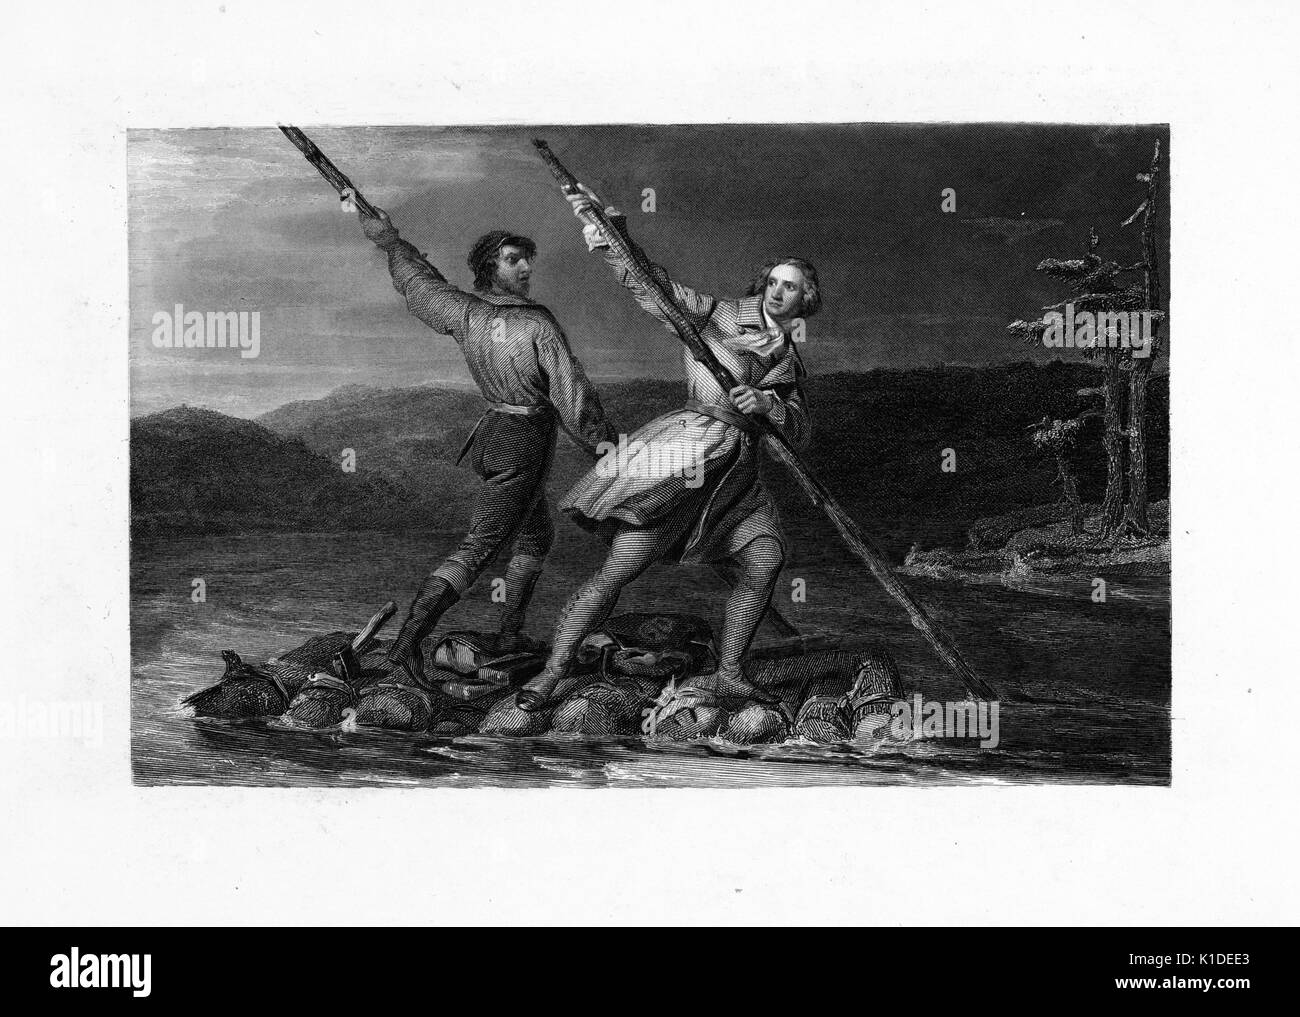 An engraving of George Washington, then a Colonel, crossing the Allegheny river with Christopher Gist on a roughly constructed raft, source material for the engraving was Daniel Huntington's 'George Washington and Christopher Gist Crossing the Allegheny River', 1900. From the New York Public Library. Stock Photo